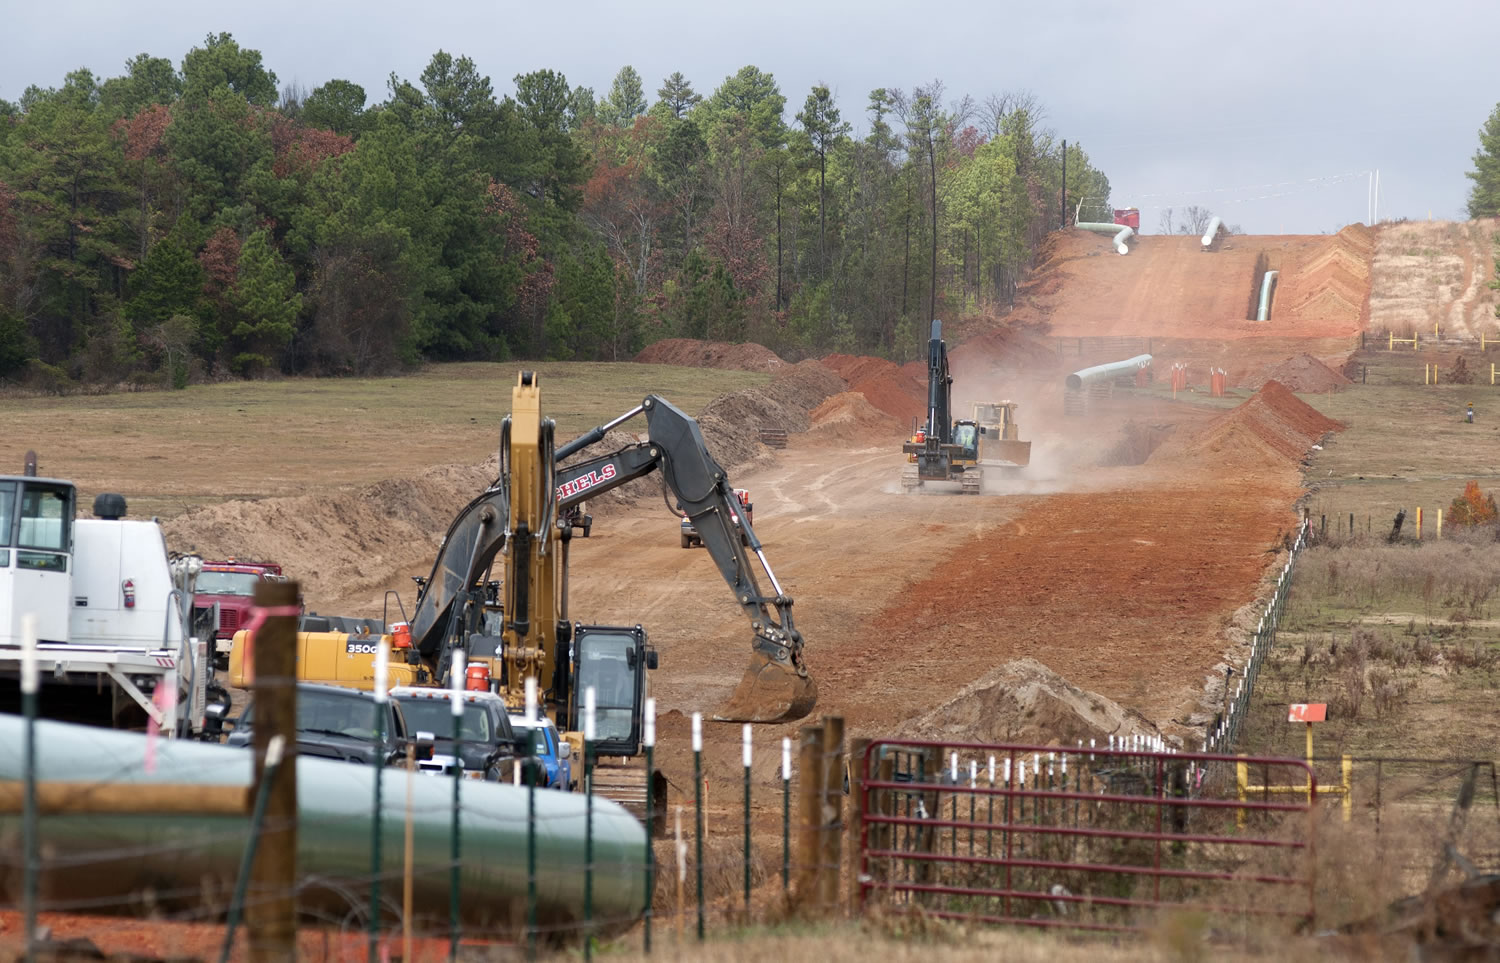 Crews work on construction of the TransCanada Keystone XL Pipeline near County Road 363 and County Road 357, east of Winona, Texas, on Dec. 3, 2012. In a move that disappointed environmental groups and cheered the oil industry, the Obama administration on Jan.